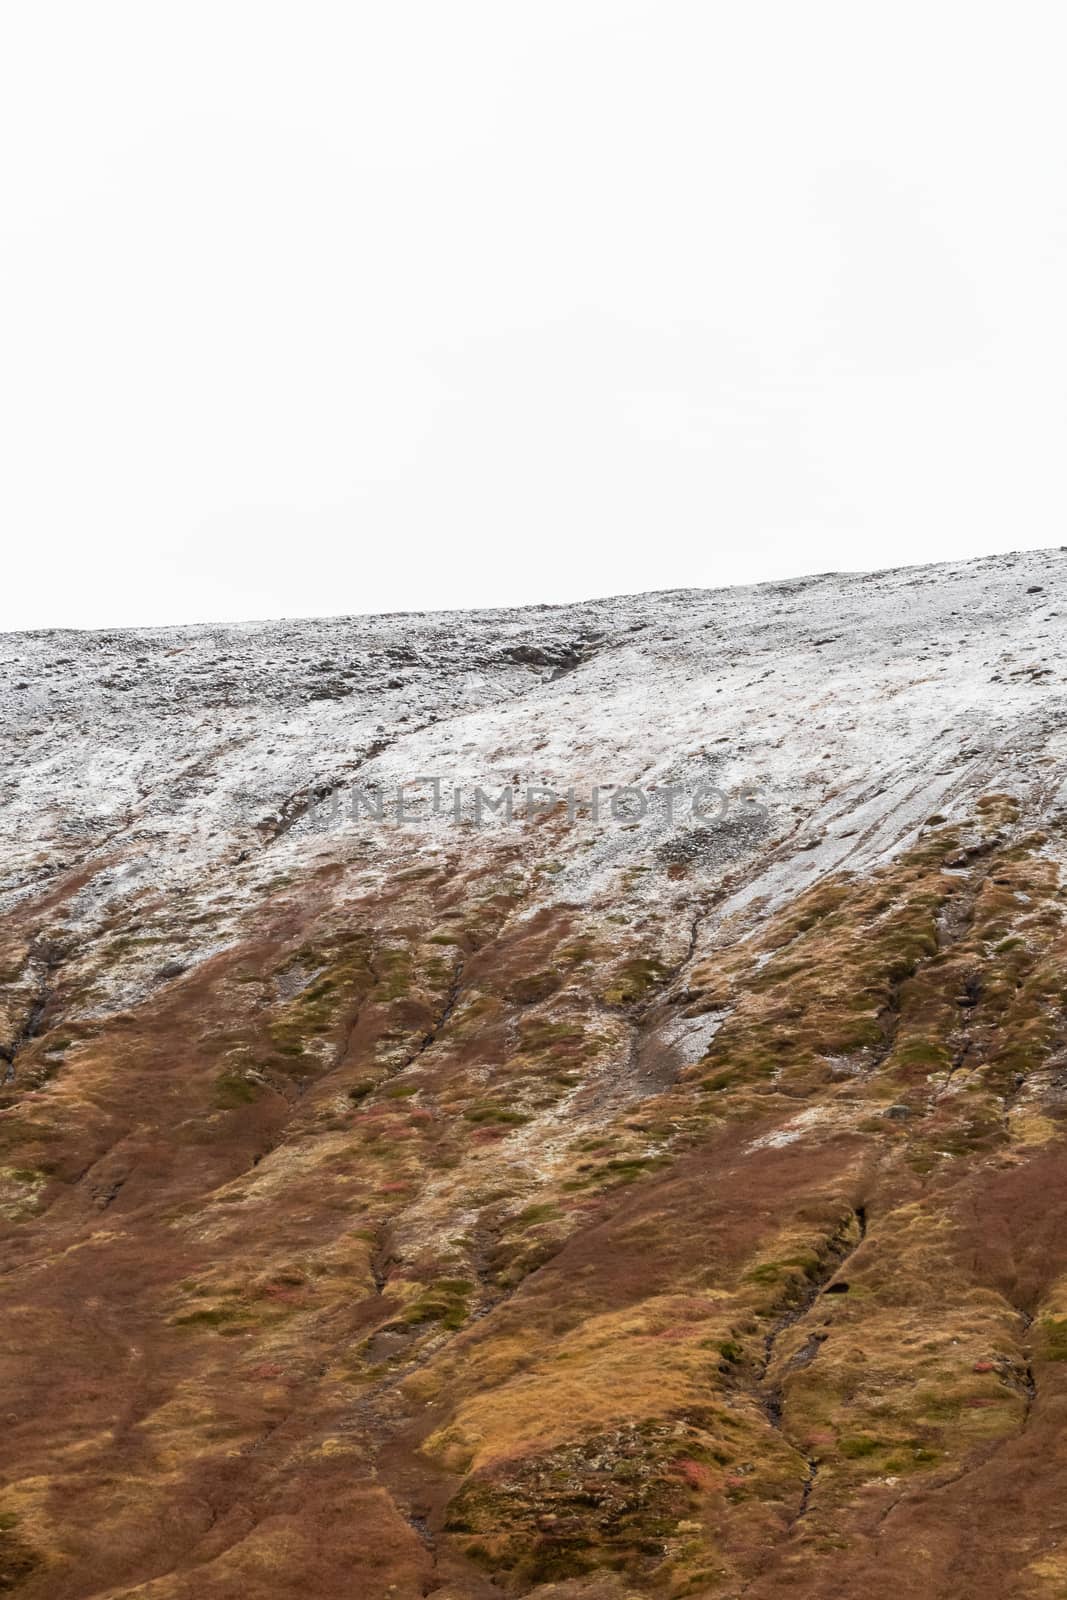 Snow line on mountain slope in Iceland close to the West fjords